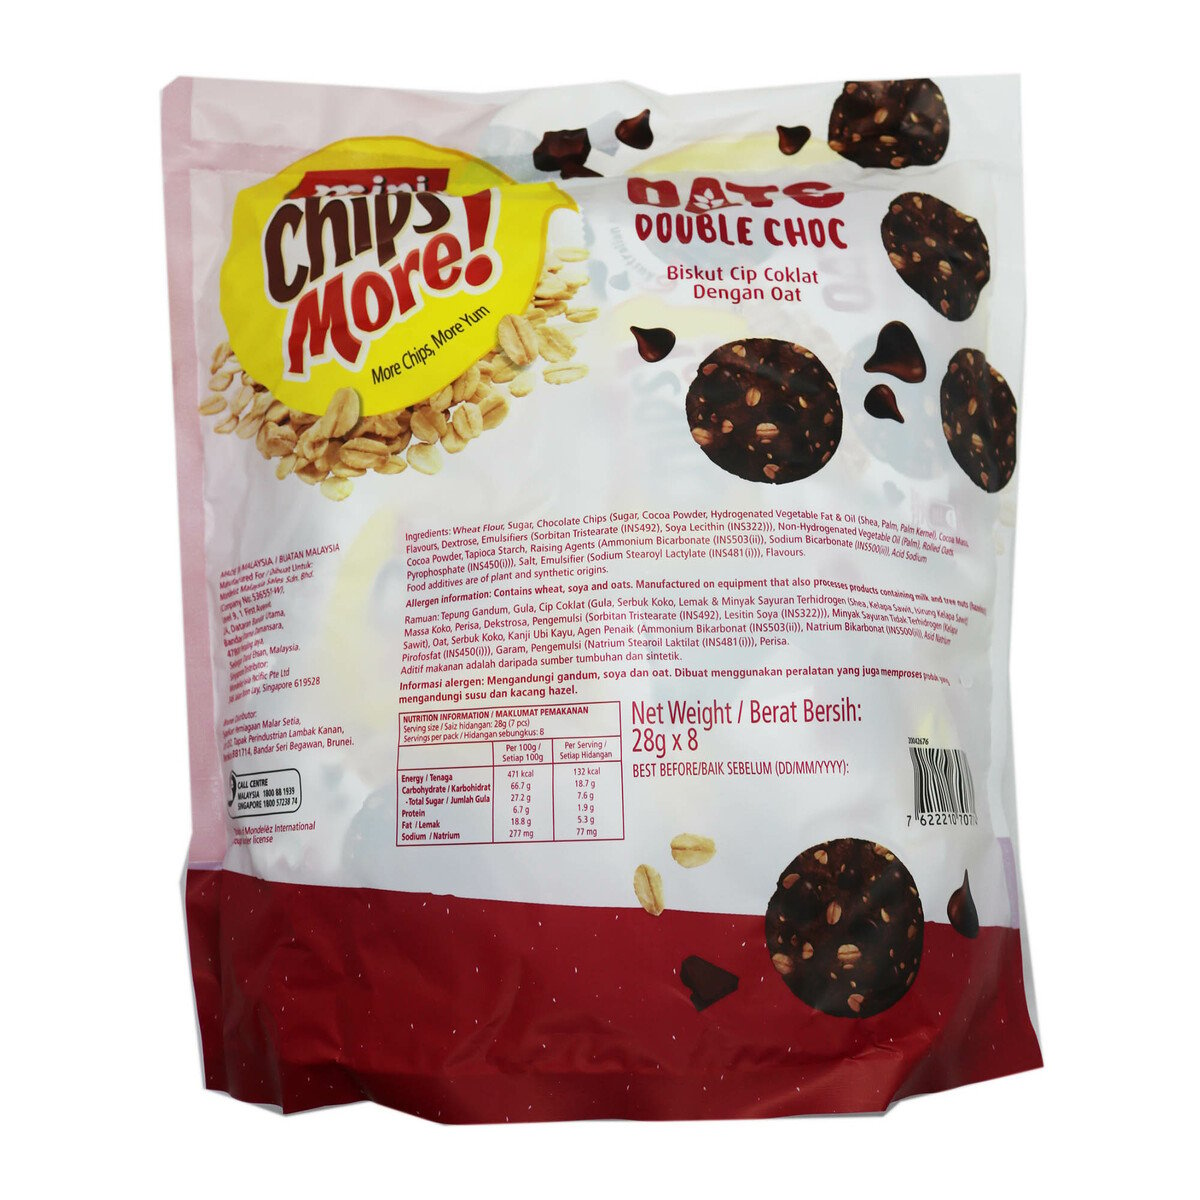 Chipsmore Oats Double Chocolate 8 x 28g